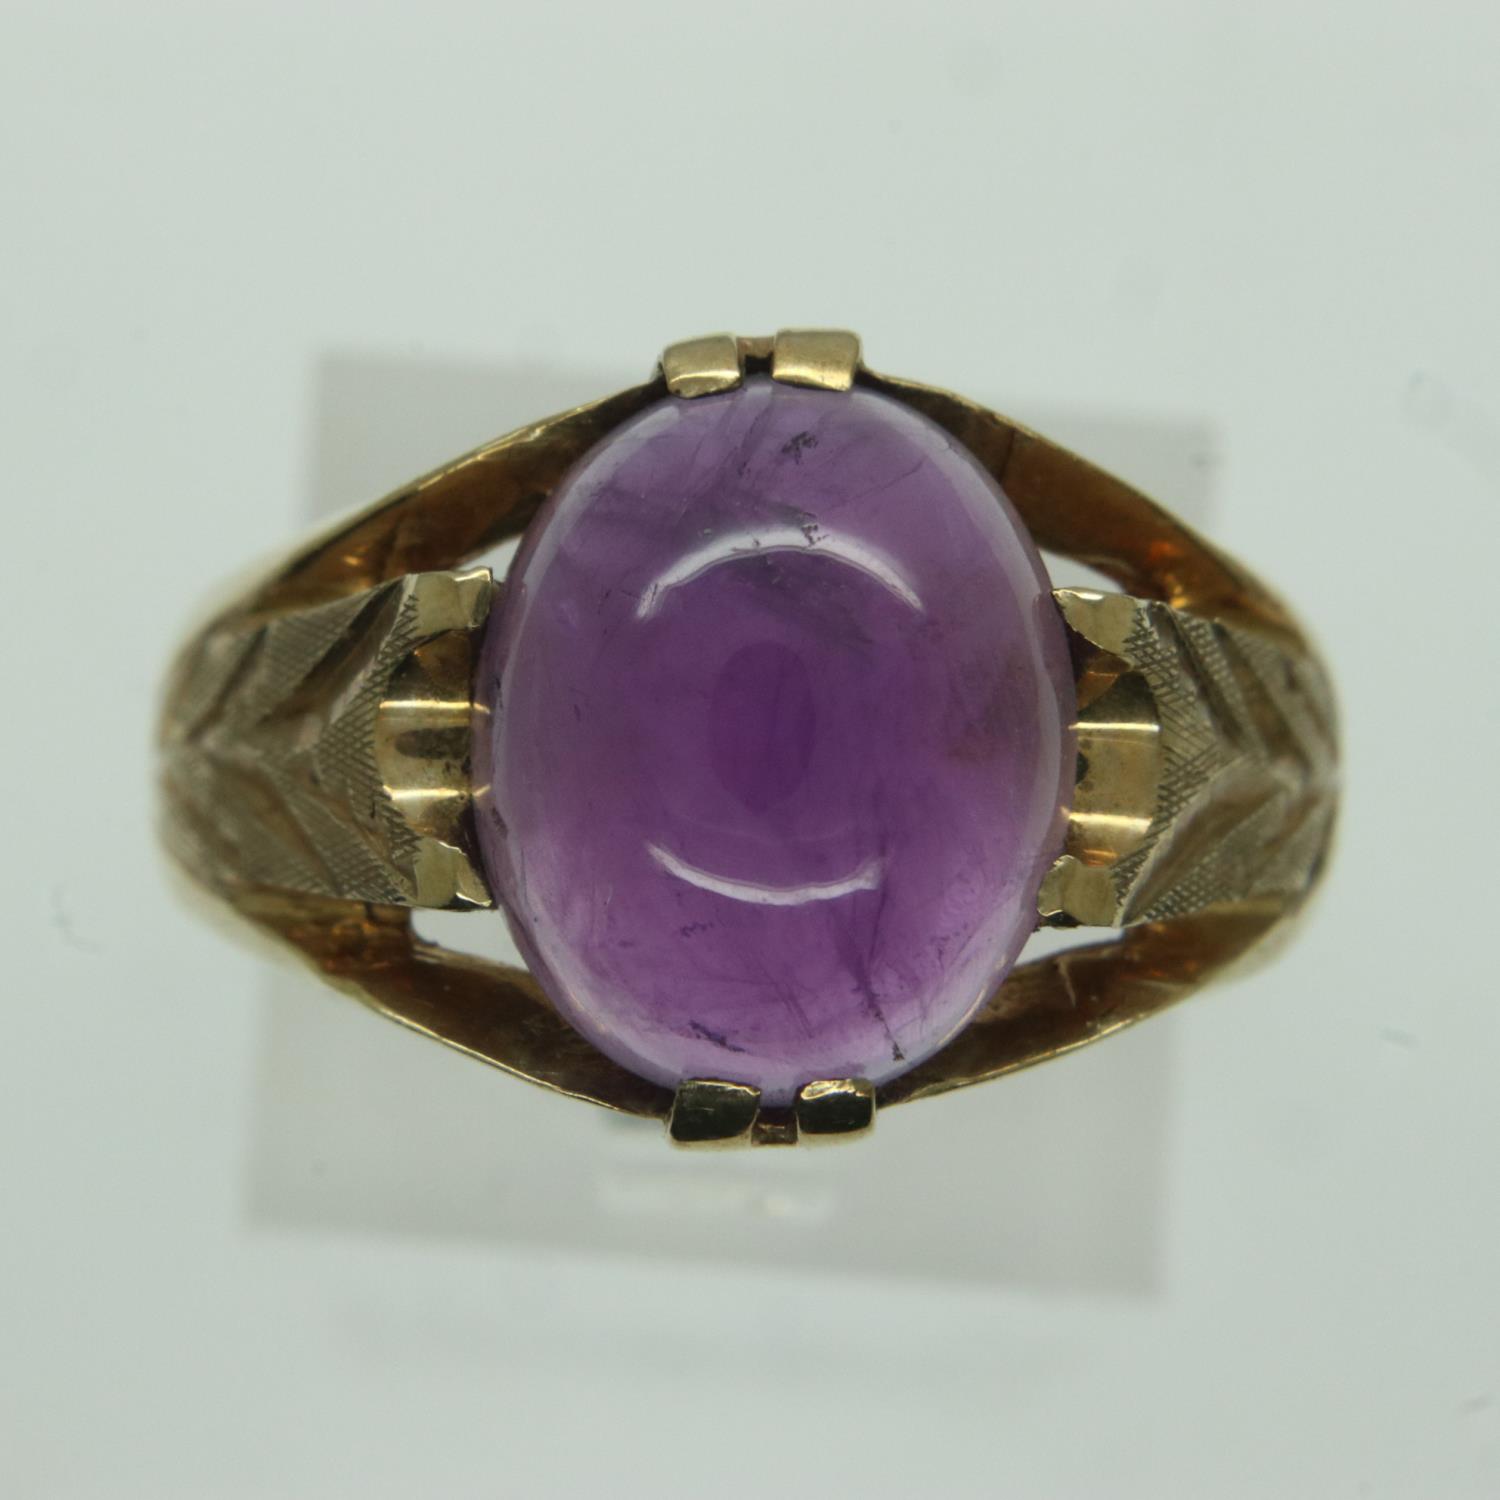 9ct gold ring set with amethyst cabochon, size T, 7.0g. UK P&P Group 1 (£16+VAT for the first lot